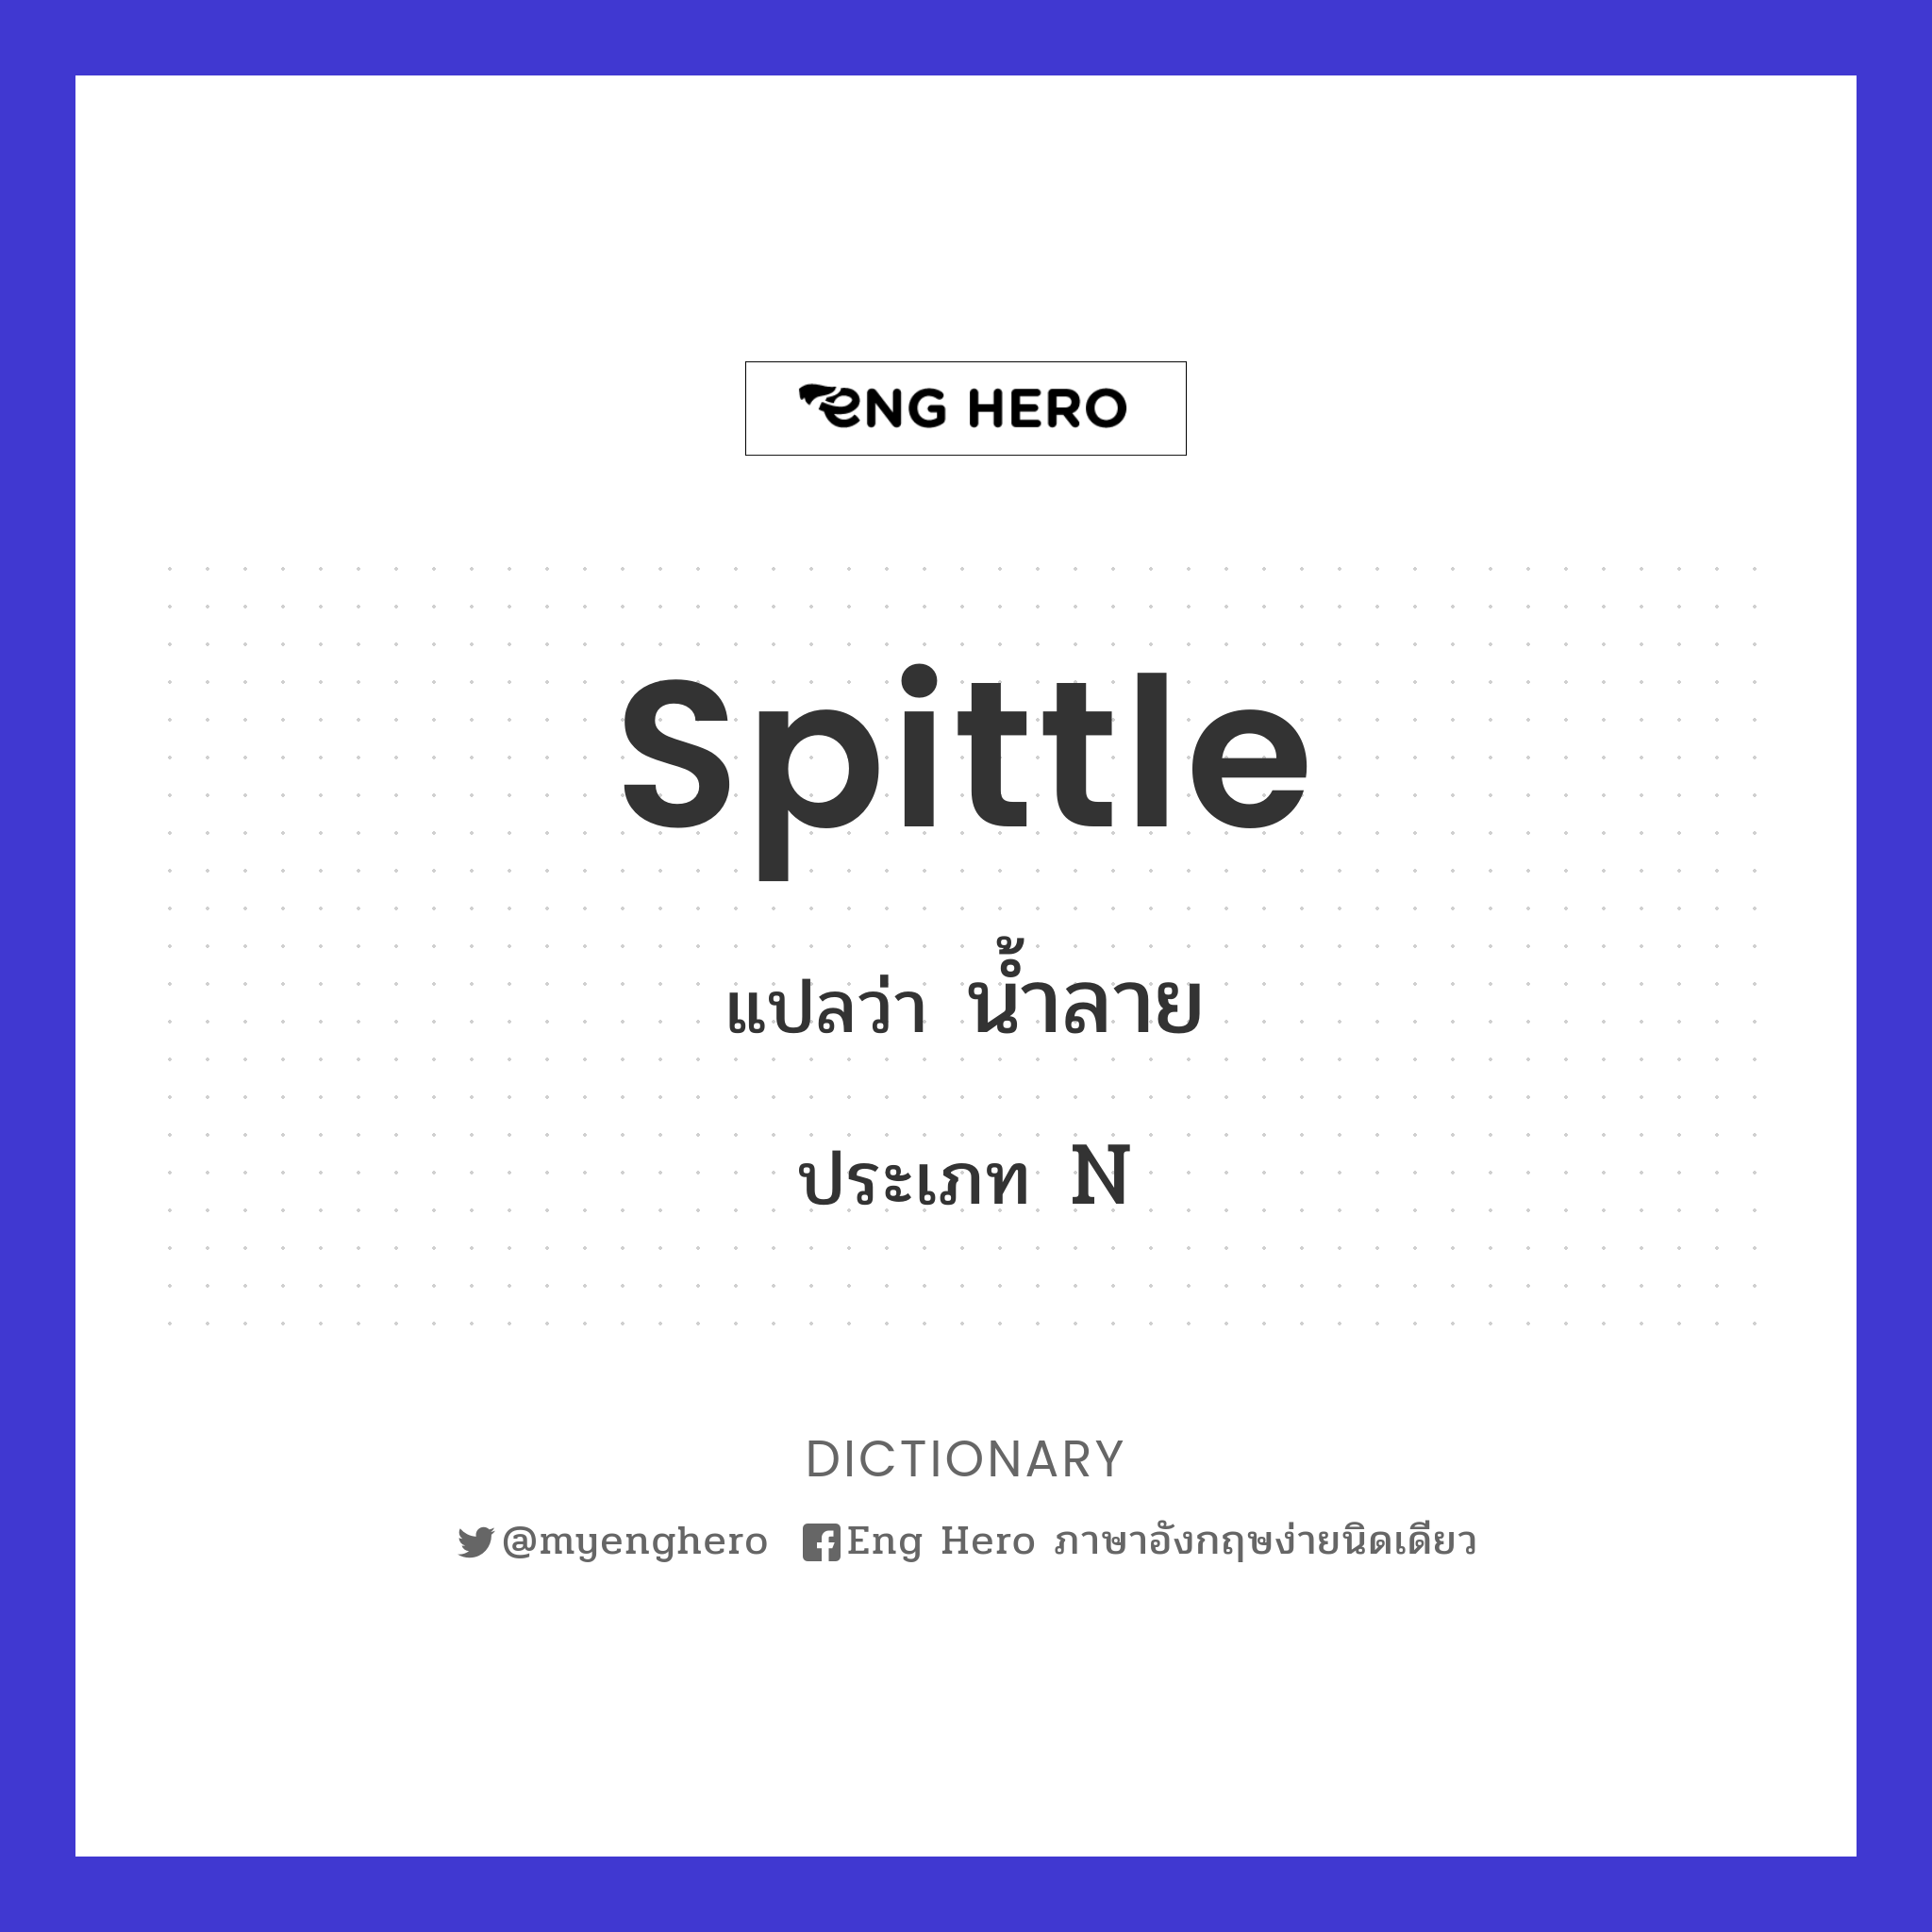 spittle